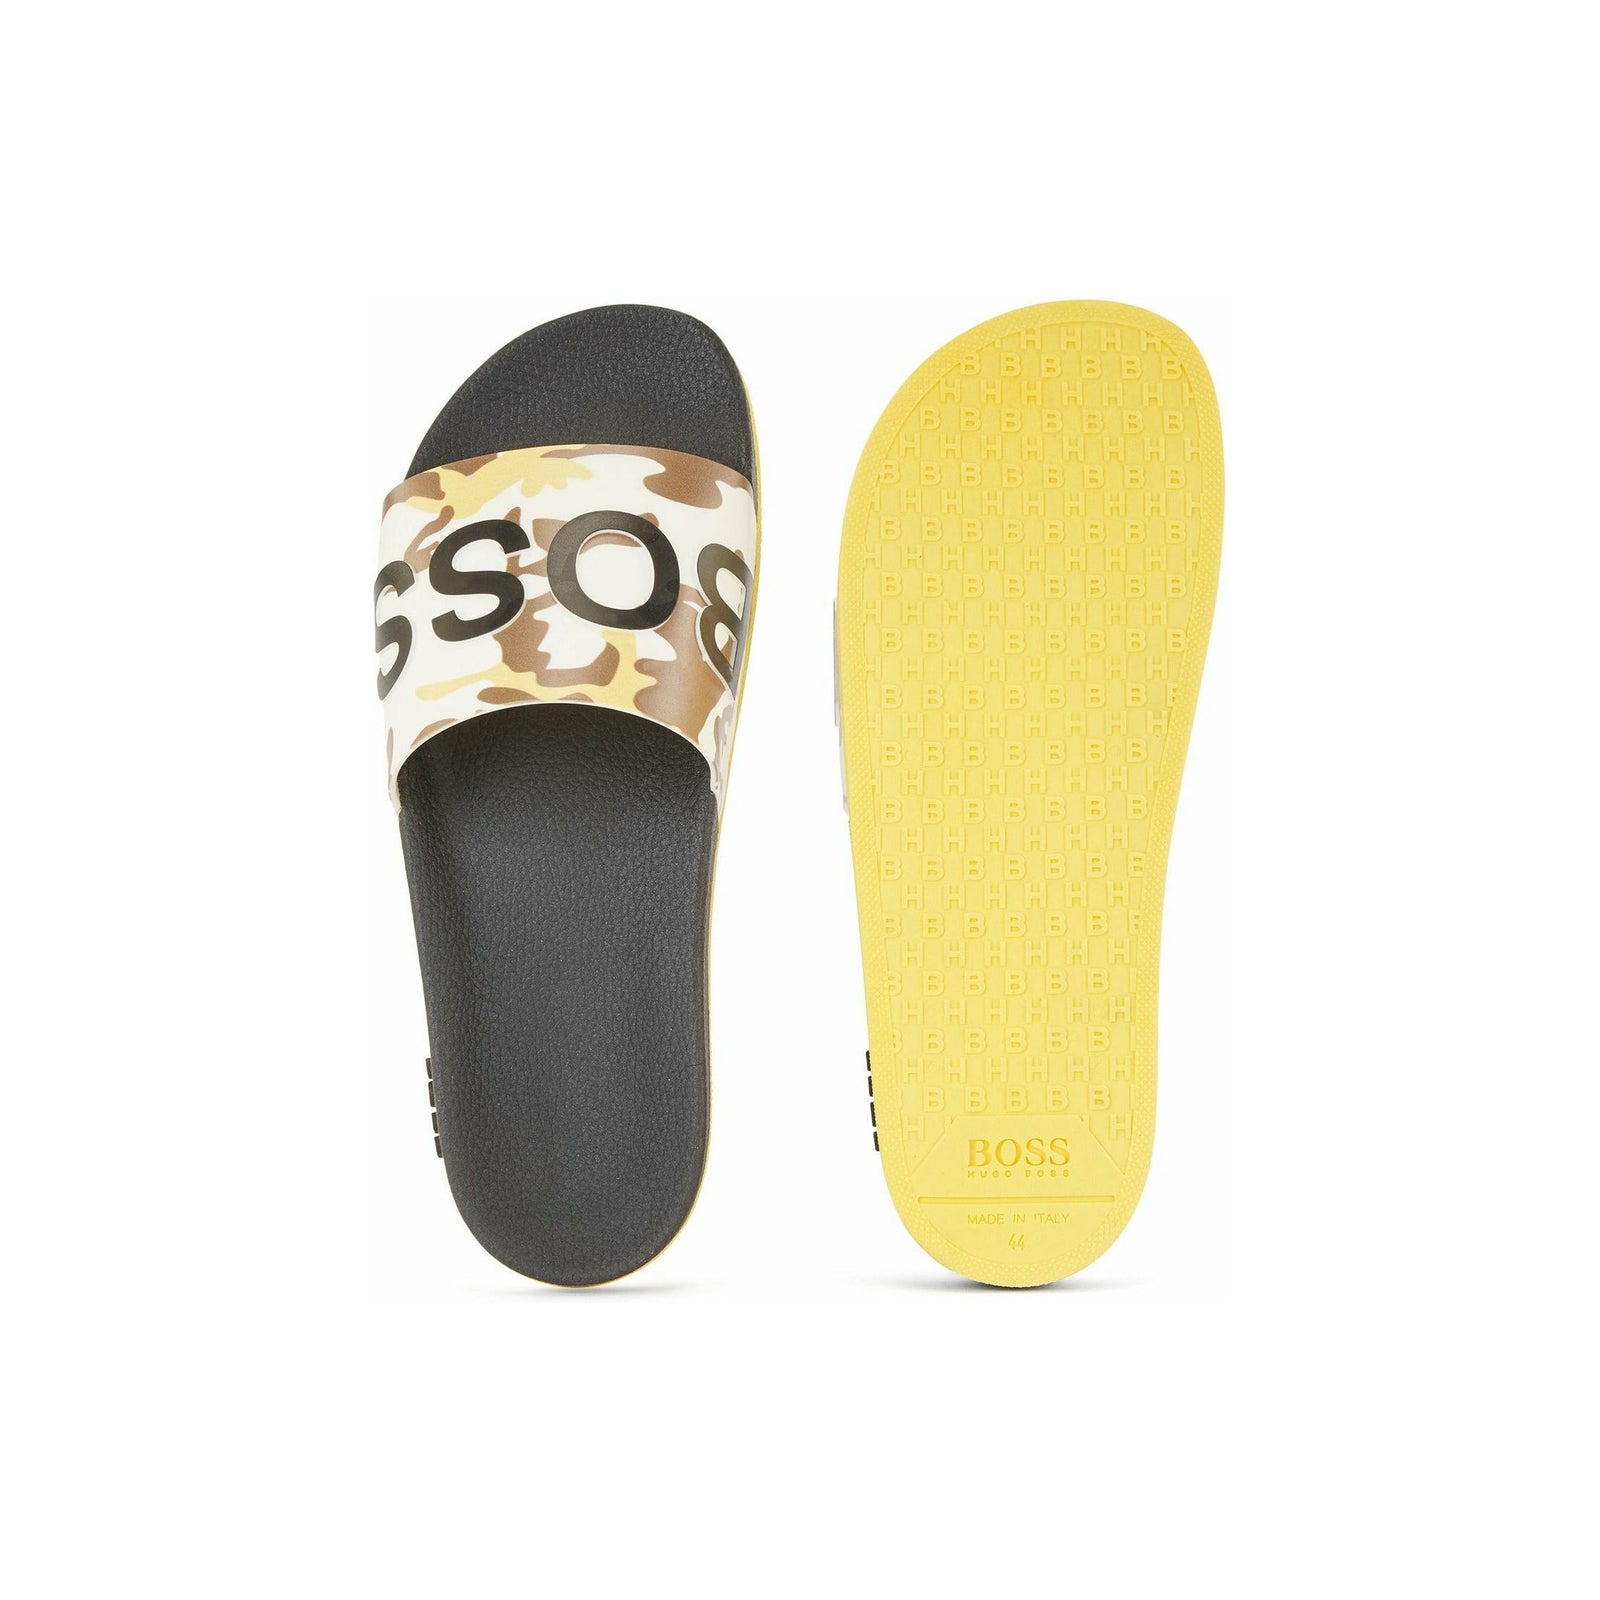 ITALIAN-MADE SLIDES WITH CAMOUFLAGE PRINT AND MONOGRAM SOLE - Yooto